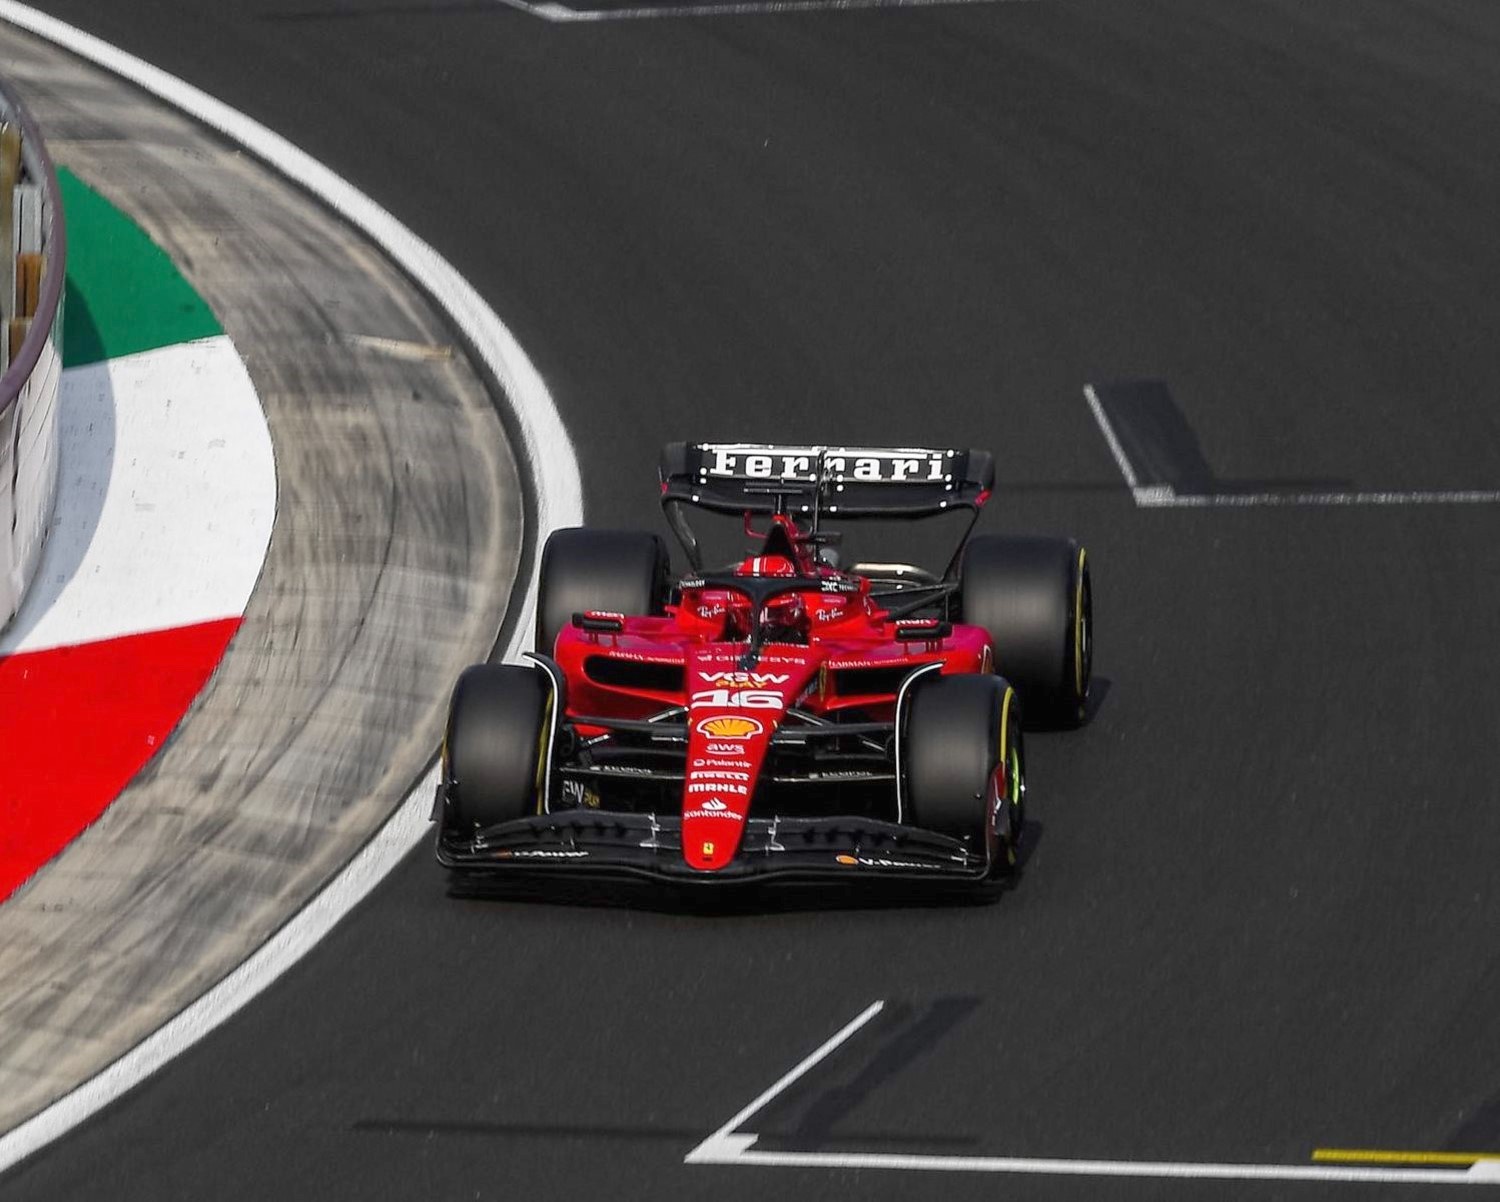 #16 Ferrari of Charles Leclerc in practice for the 2023 Hungarian GP.